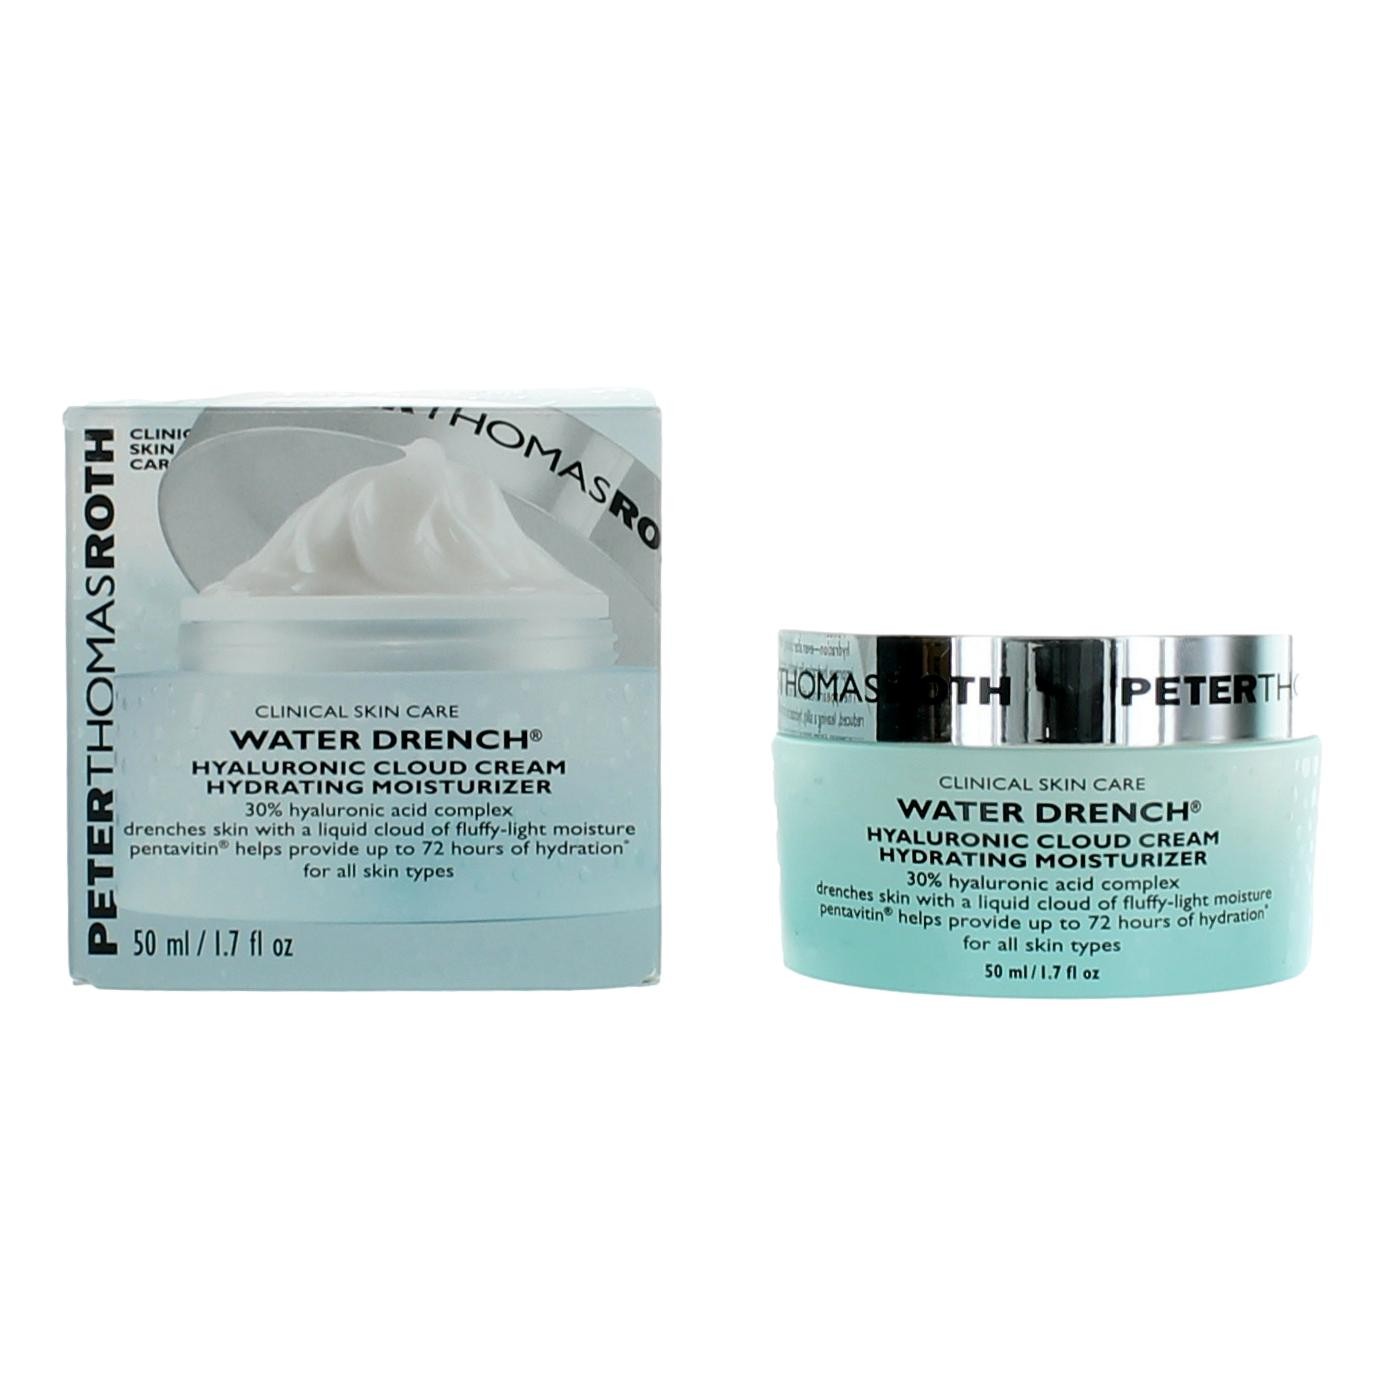 Peter Thomas Roth Water Drench Hyaluronic Cloud Cream 1.7 Hydrating Moisturizer for Unisex - image 1 of 8